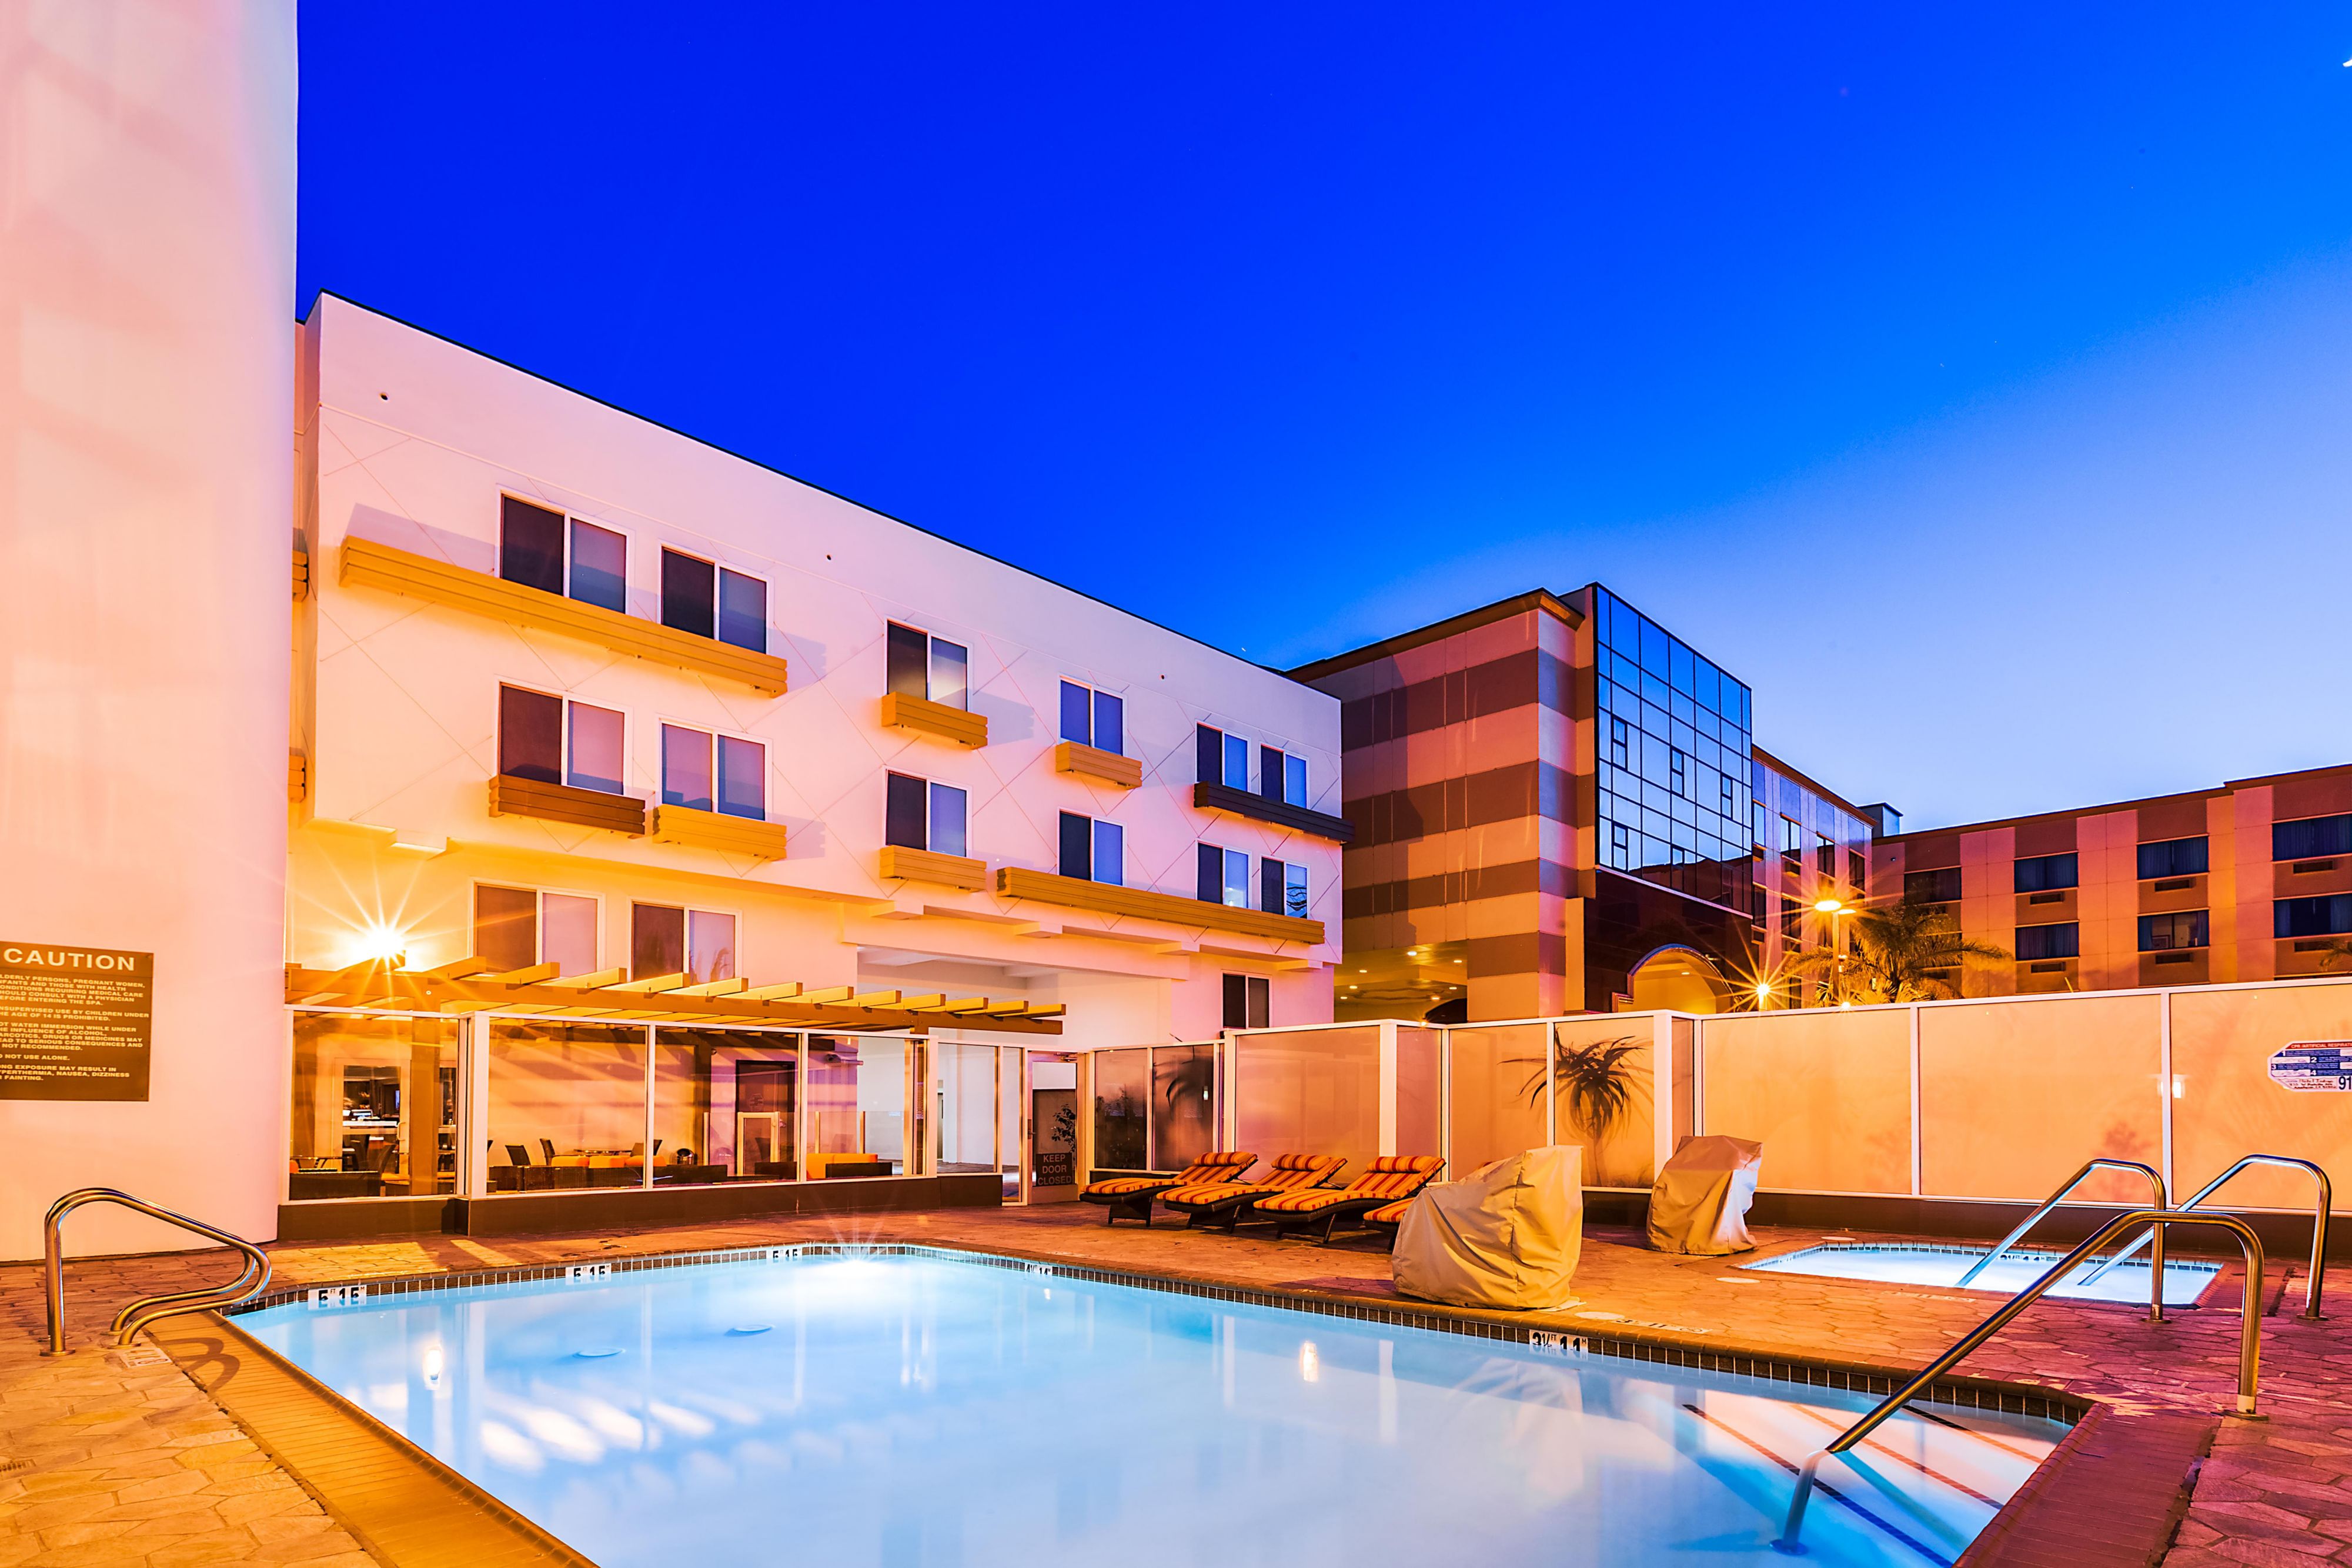 Find relief from the heat or simply enjoy a dip in our outdoor pool. At Hotel Indigo Anaheim, you'll enjoy a prime location to Disneyland and dining options just steps from the hotel. 